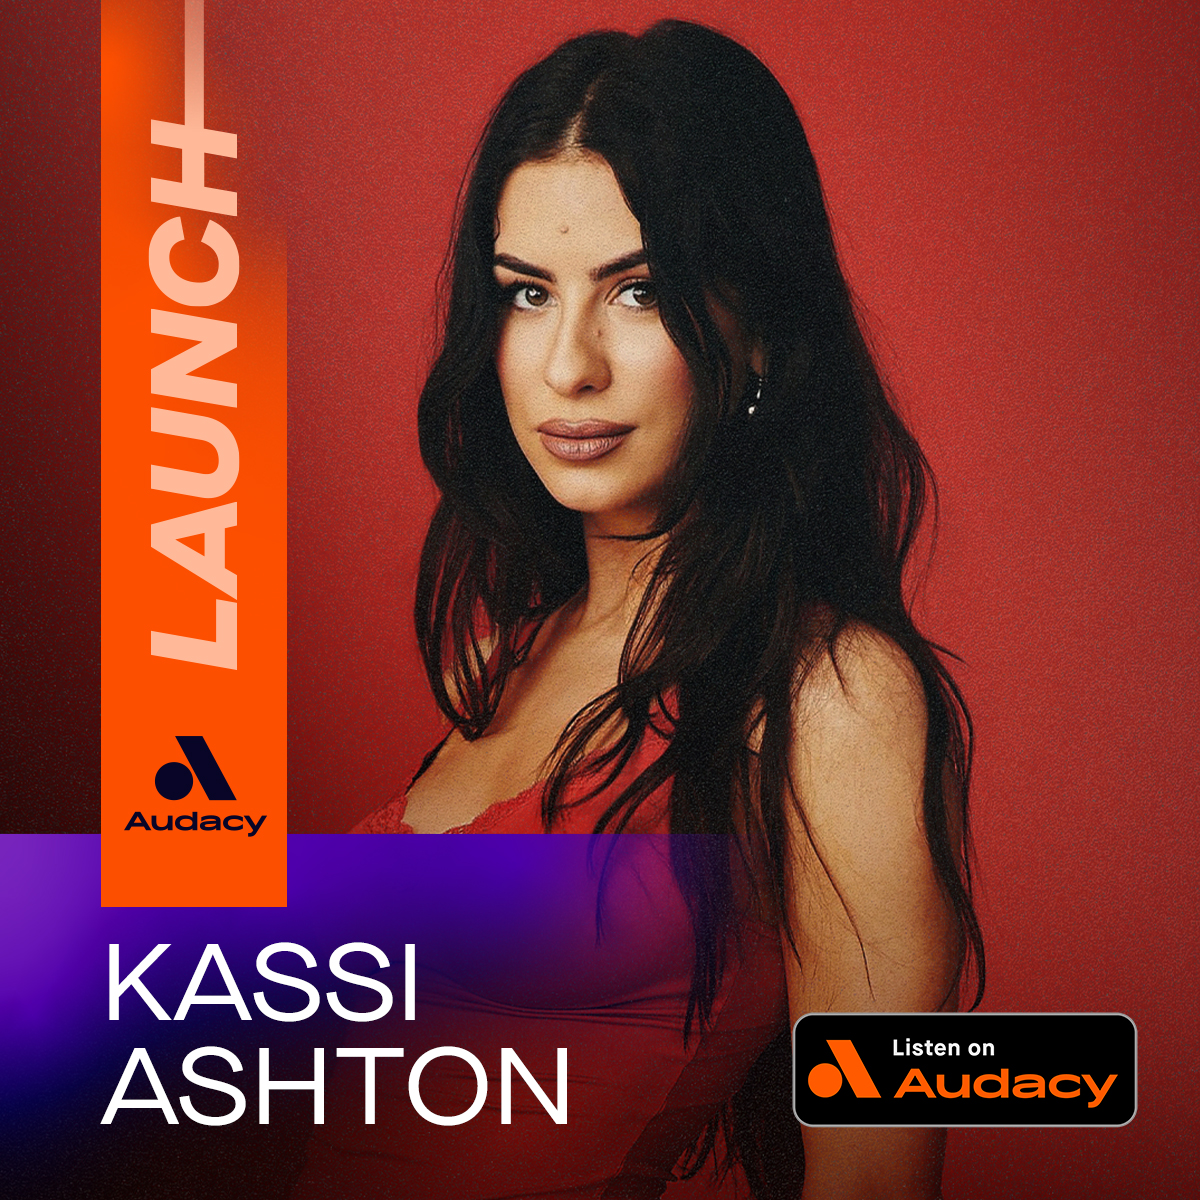 Birthday Bash alumni @KassiAshton has been chosen as our #AudacyLAUNCH artist! Check out exclusive content on the free @Audacy app now 🎧